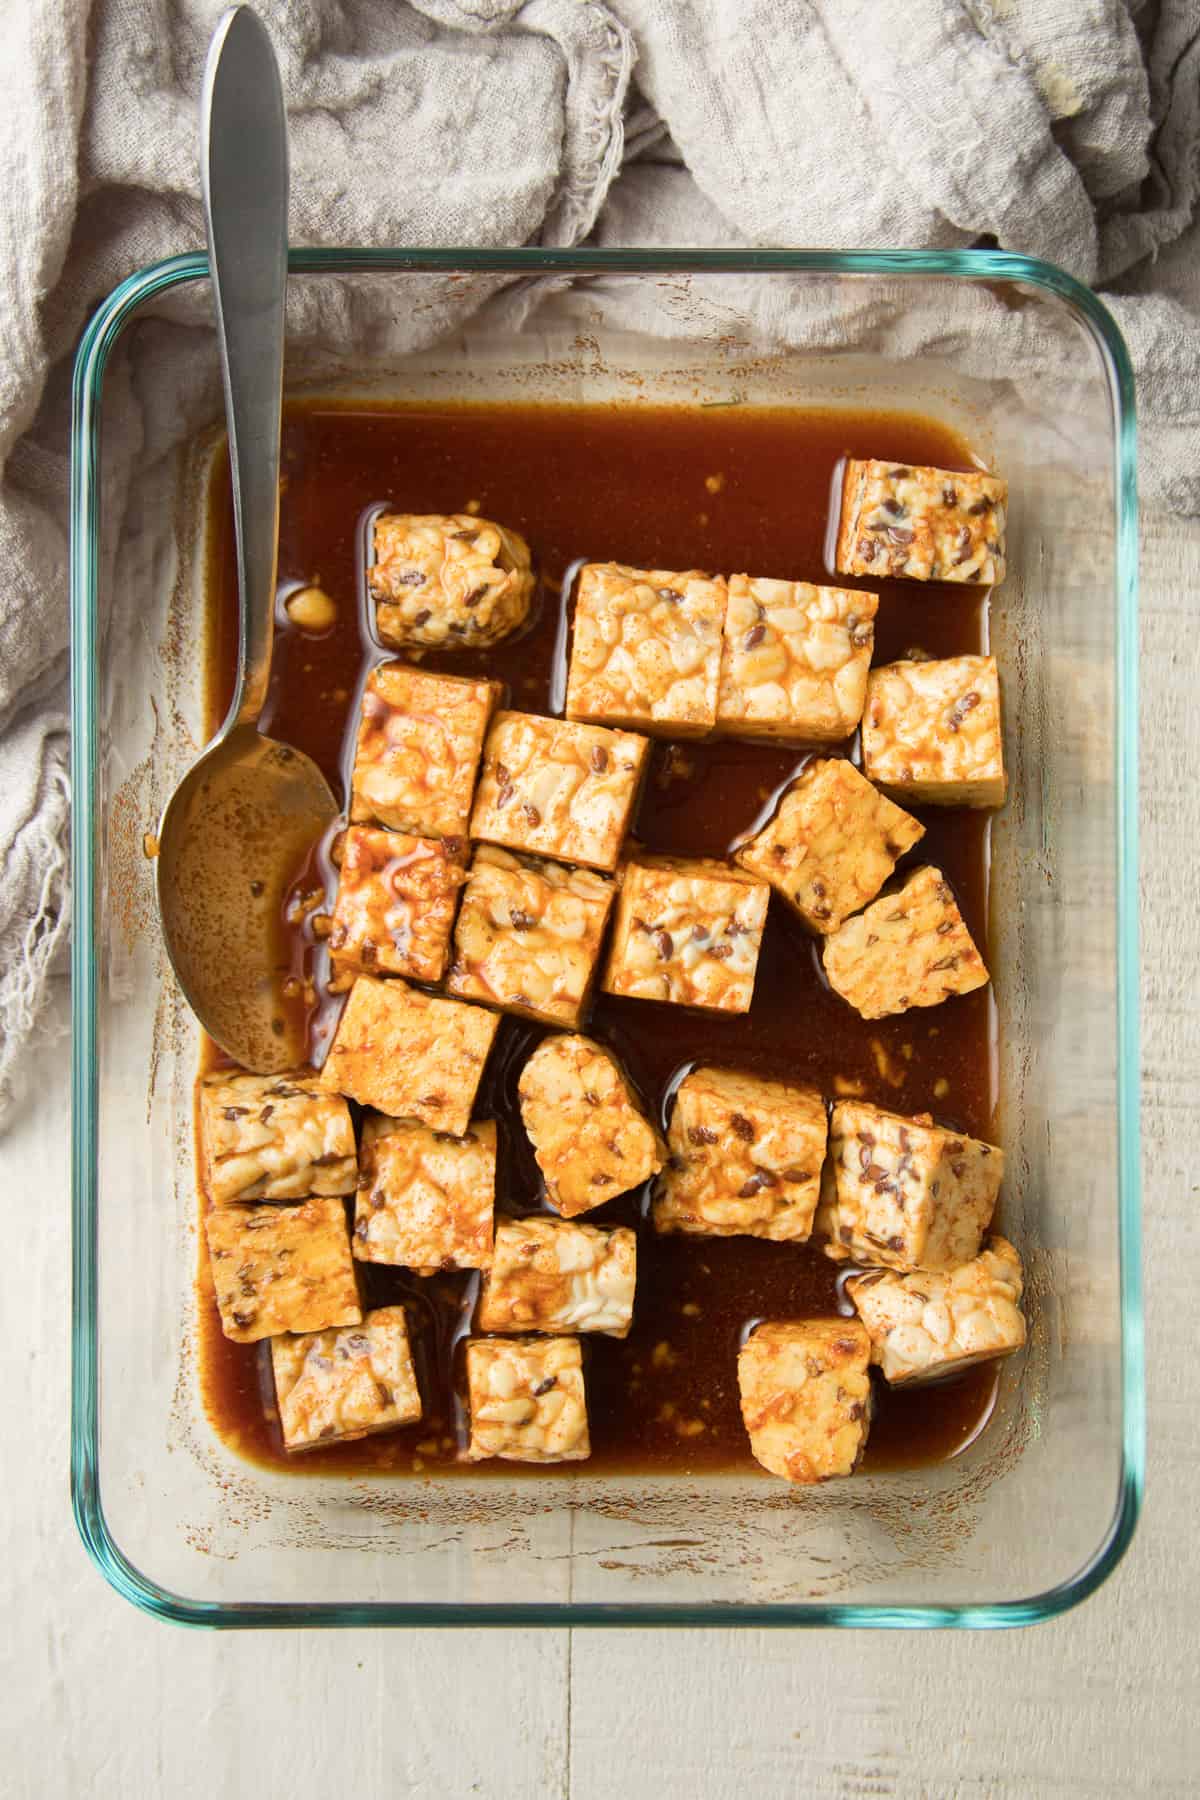 Tempeh marinating in a glass dish with spoon.